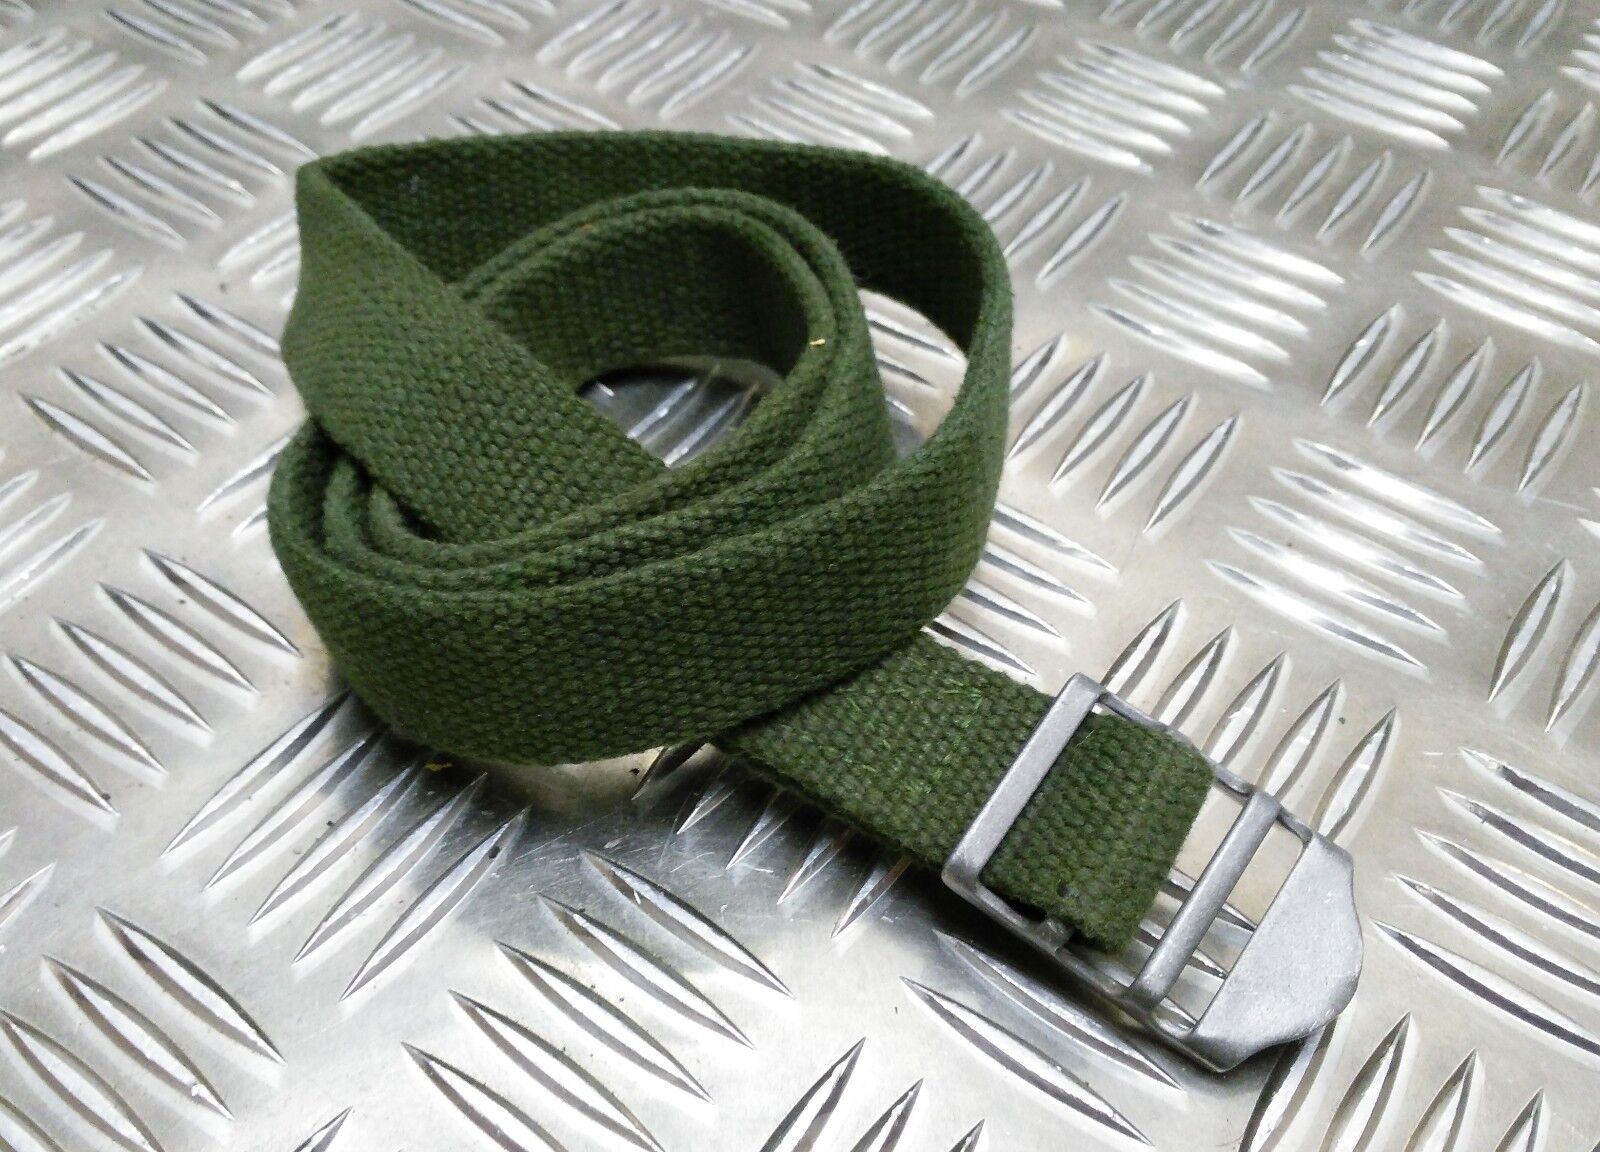 Genuine Vintage Military Issue Green Canvas Webbing Issued Utility Pack Strap 